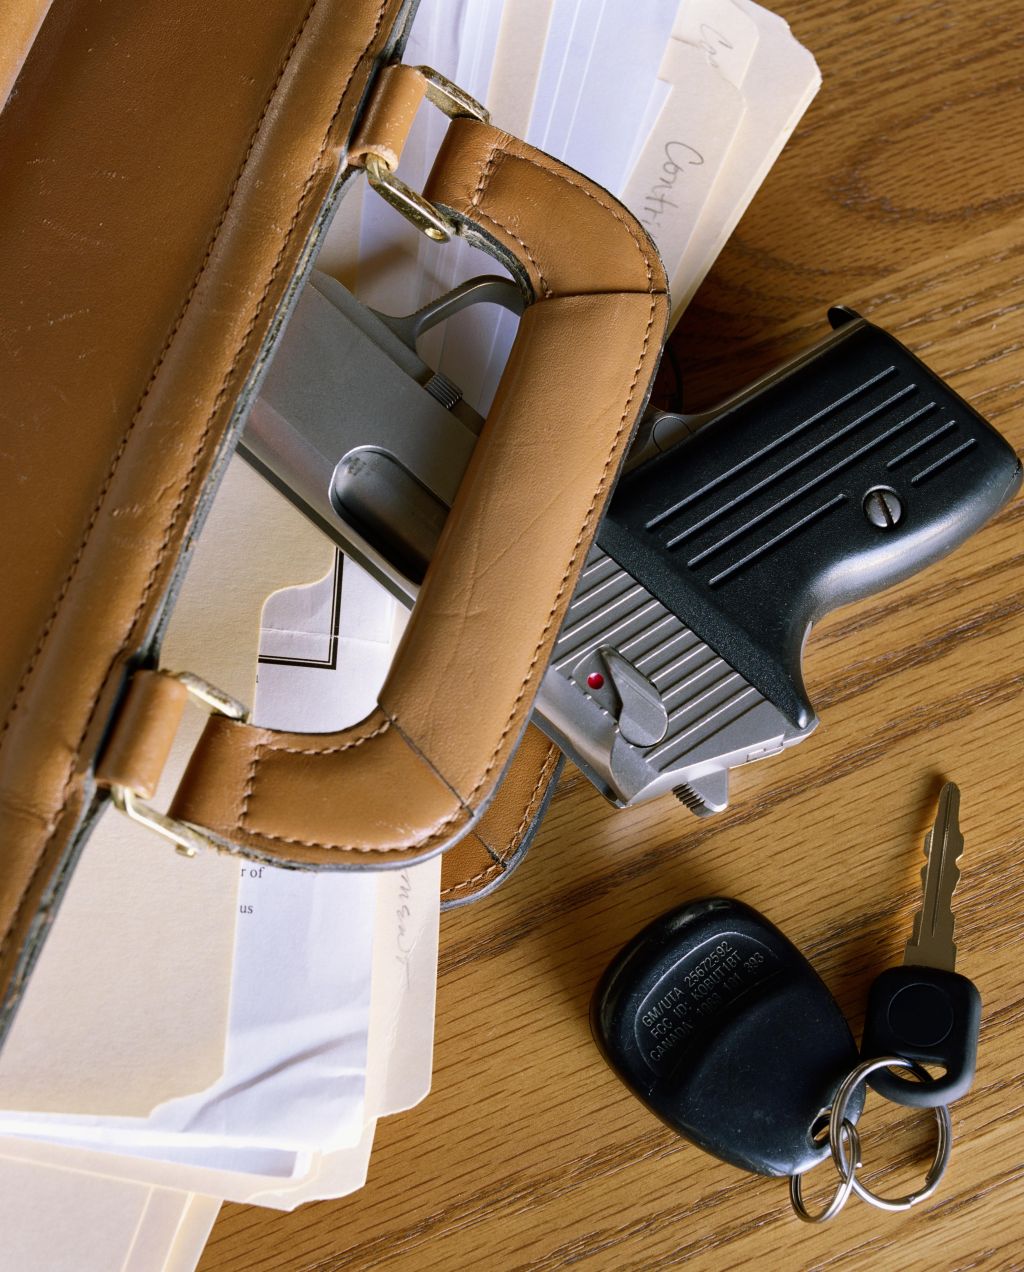 Pistol in briefcase, overhead view, close-up